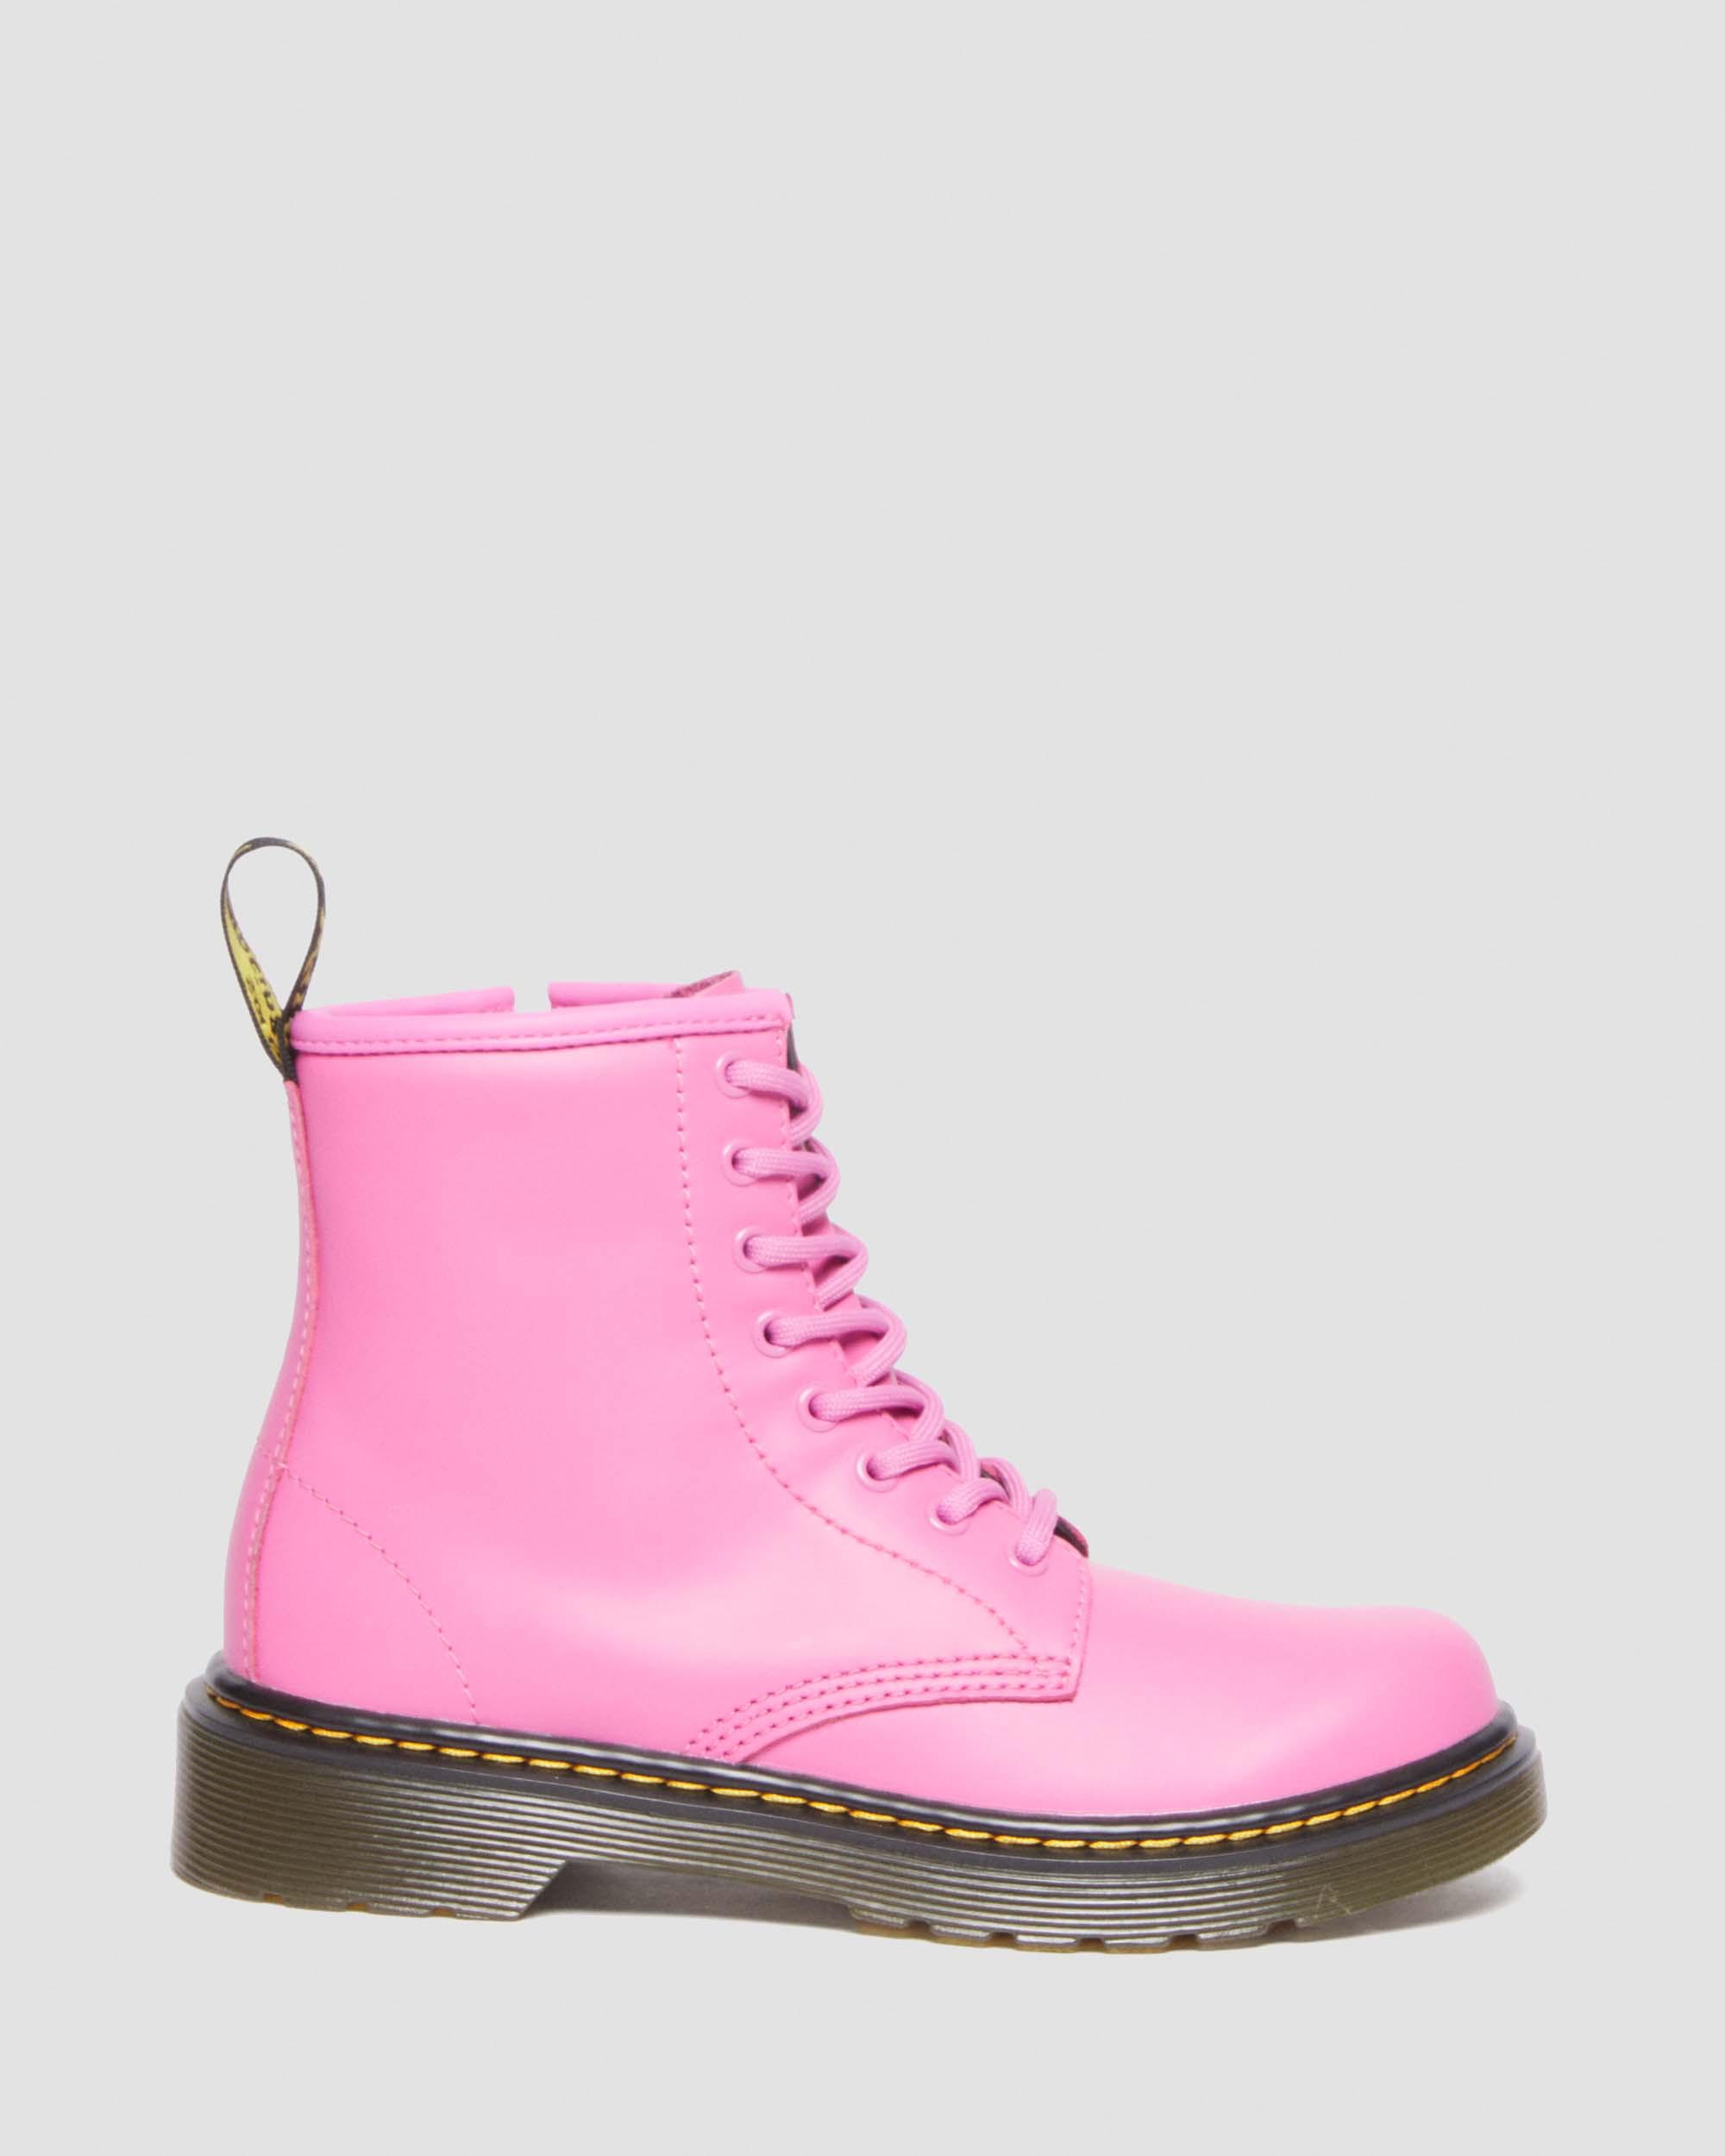 Junior 1460 Leather Lace Up Boots in Thrift Pink | Dr. Martens